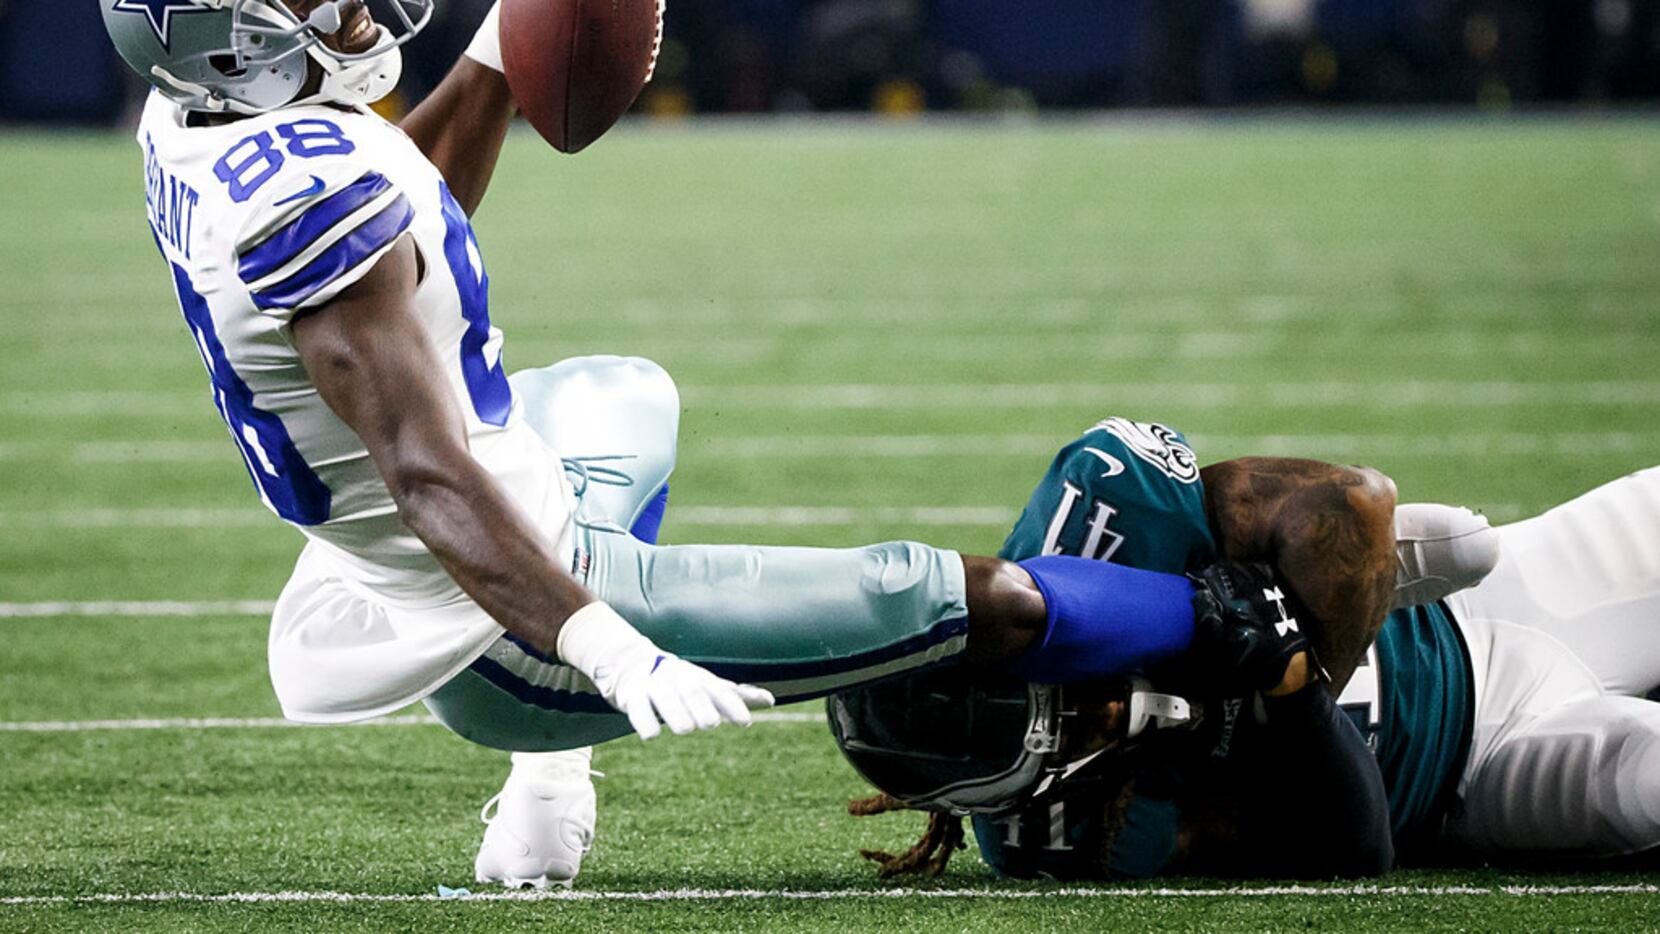 The cold, hard truth: Dez Bryant is no longer an elite receiver